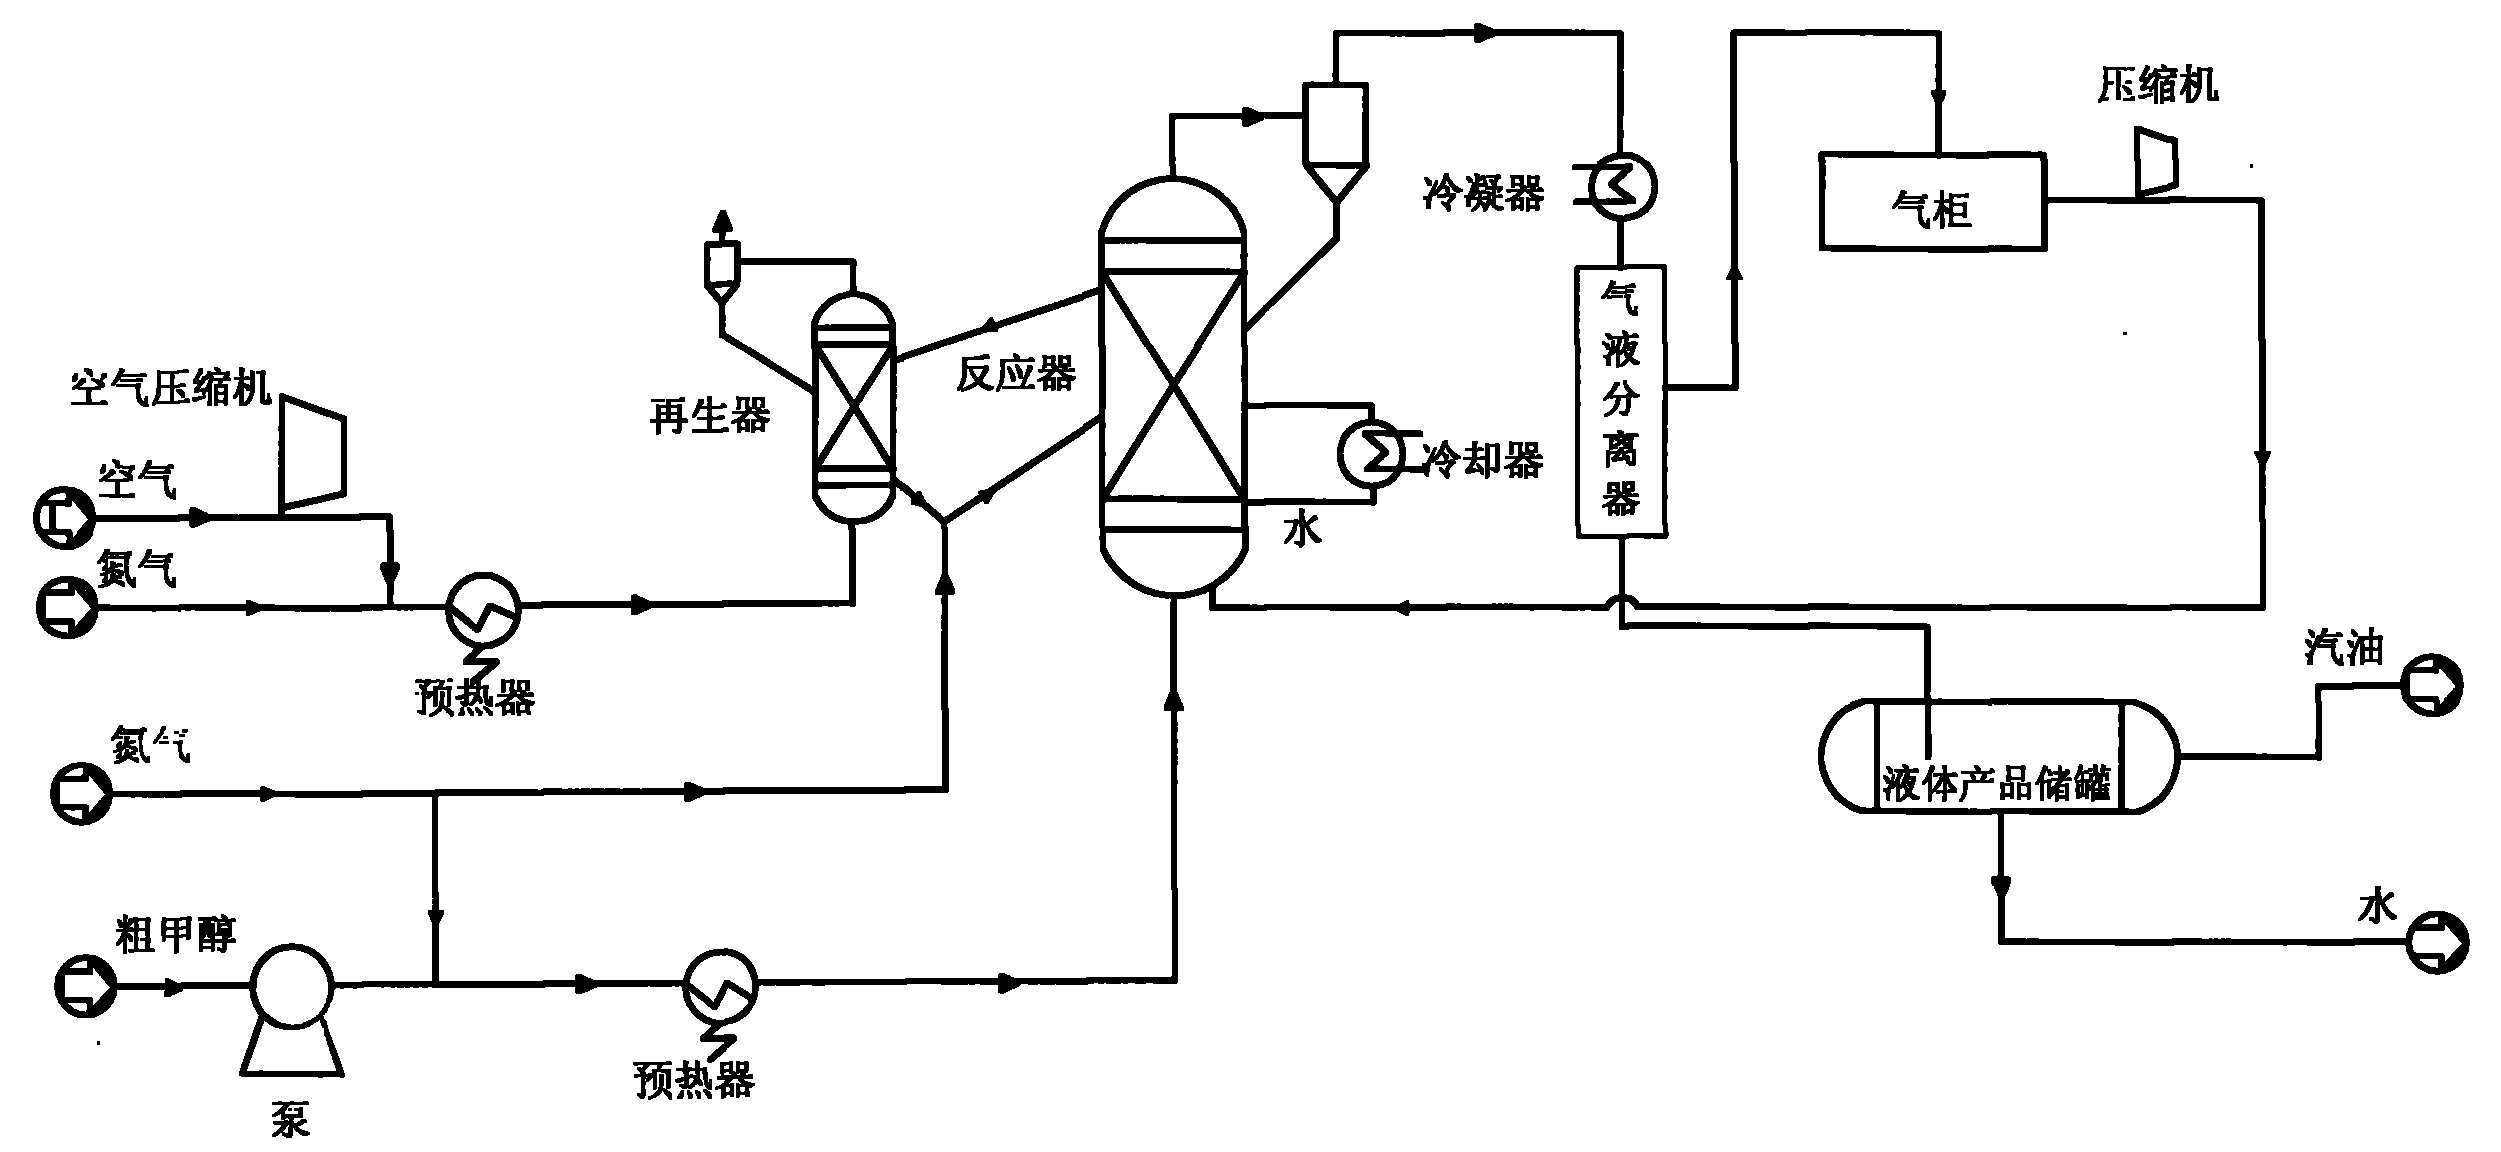 Method of producing gasoline by fluidized bed process methanol